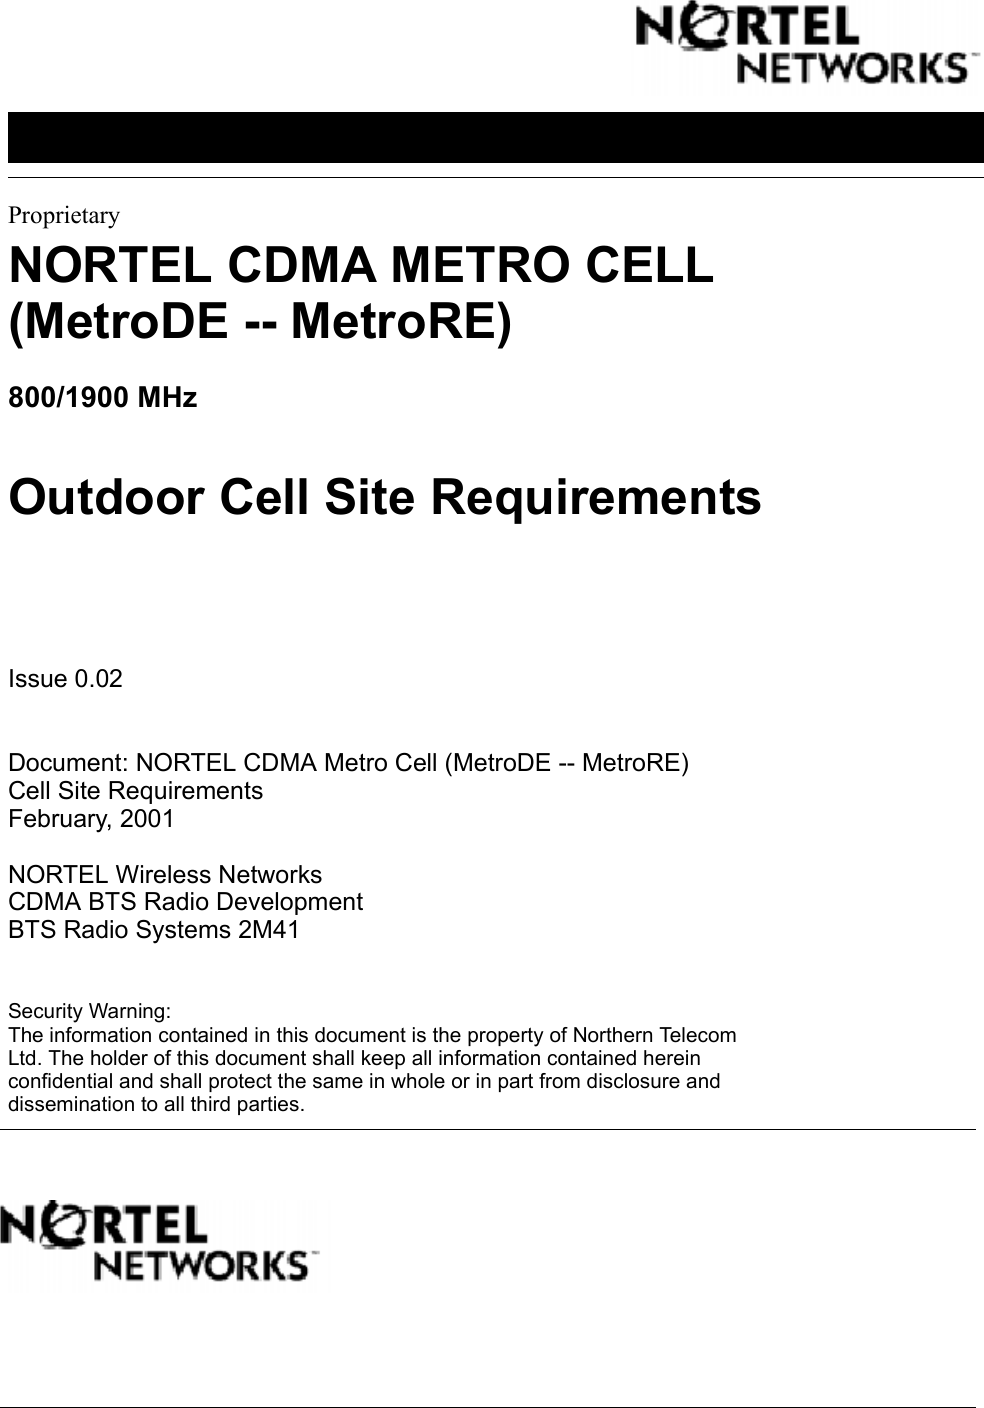 ProprietaryNORTEL CDMA METRO CELL(MetroDE -- MetroRE)800/1900 MHzOutdoor Cell Site RequirementsIssue 0.02Document: NORTEL CDMA Metro Cell (MetroDE -- MetroRE)Cell Site RequirementsFebruary, 2001NORTEL Wireless NetworksCDMA BTS Radio DevelopmentBTS Radio Systems 2M41Security Warning:The information contained in this document is the property of Northern TelecomLtd. The holder of this document shall keep all information contained hereinconfidential and shall protect the same in whole or in part from disclosure anddissemination to all third parties.